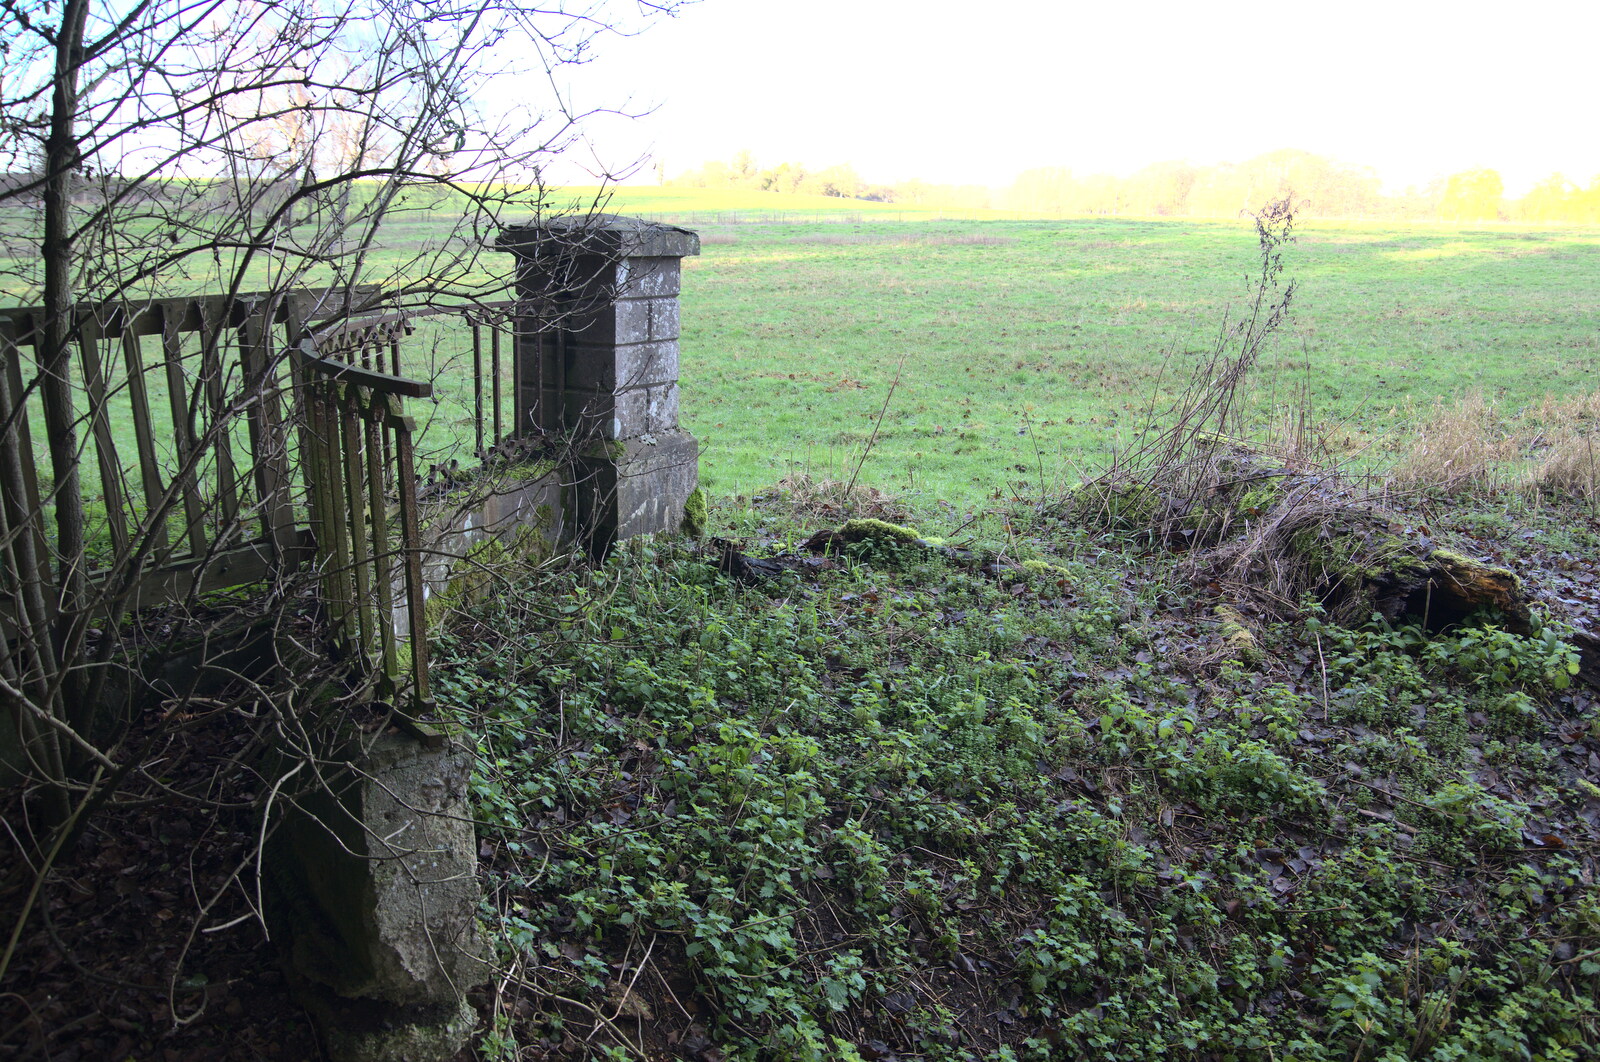 Winter Walks around Brome and Hoxne, Suffolk - 2nd January 2023: The remains of a much grander bridge over the river